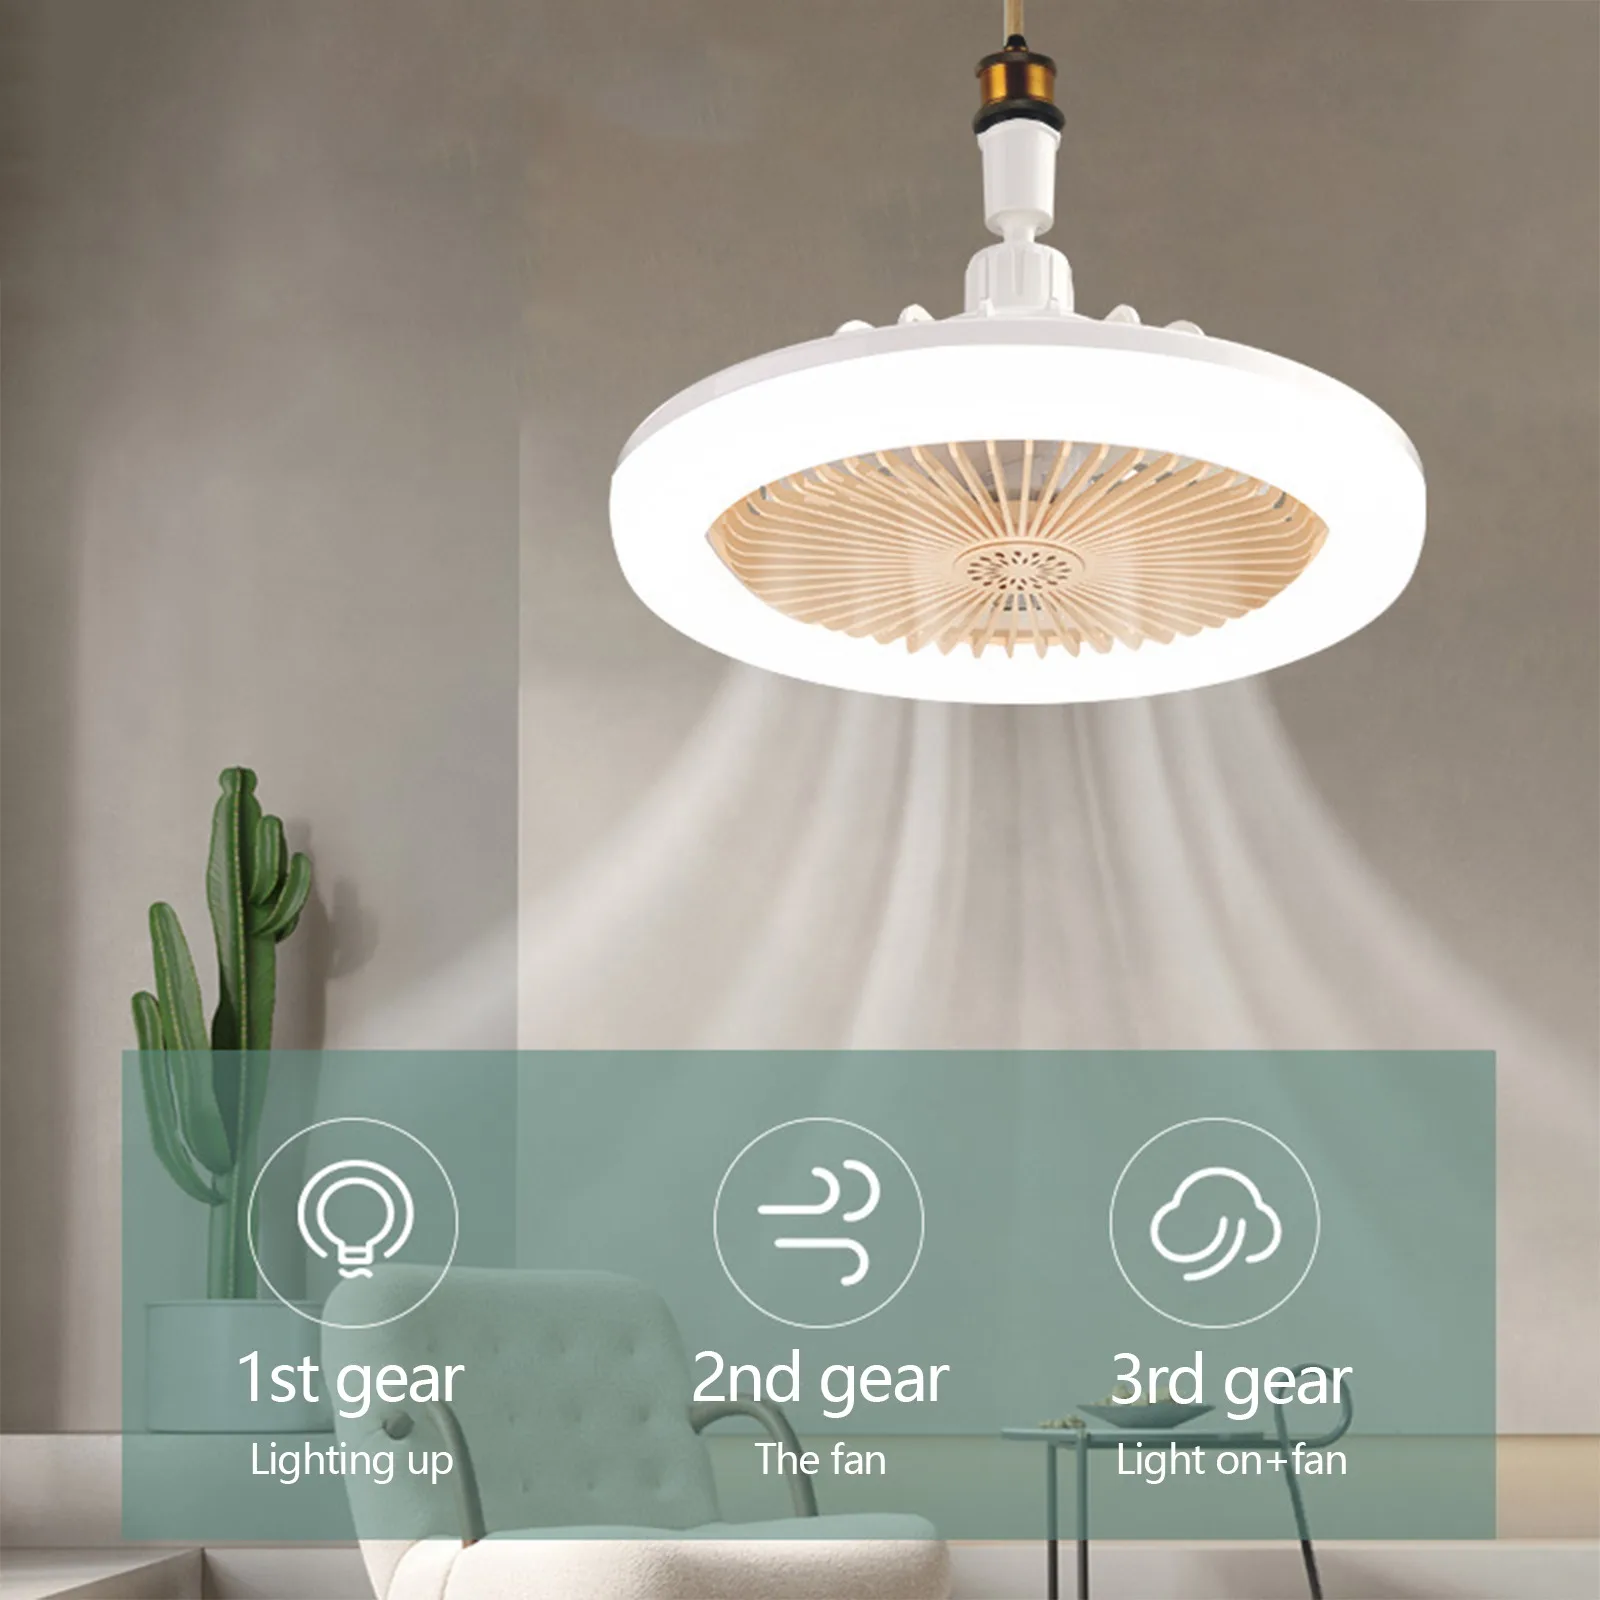 

30W Ceiling Fan With Lamp E27 Light Remote Control Aromatherapy Fan Lamp Bedroom Living Silent Cooling Fan Light